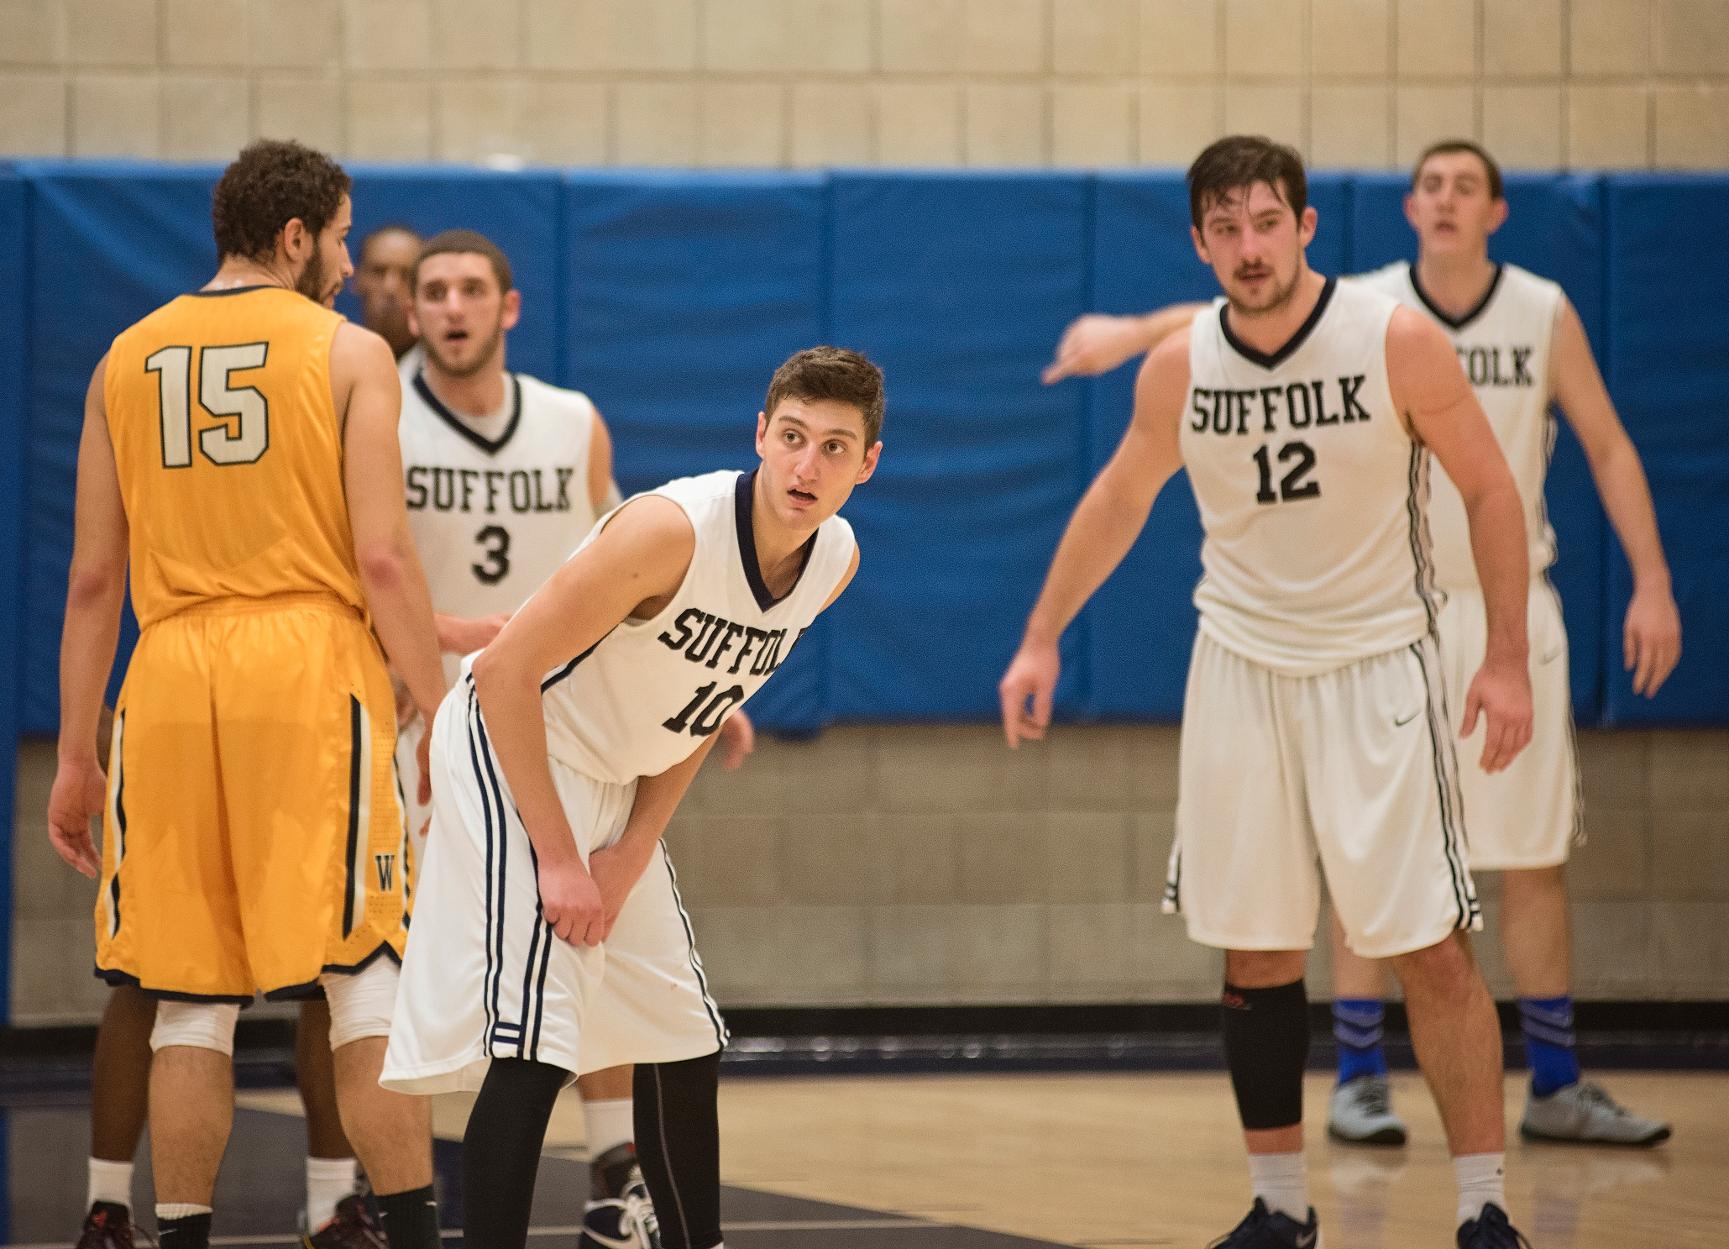 Men’s Basketball Clashes at Lasell in Regular-Season Finale